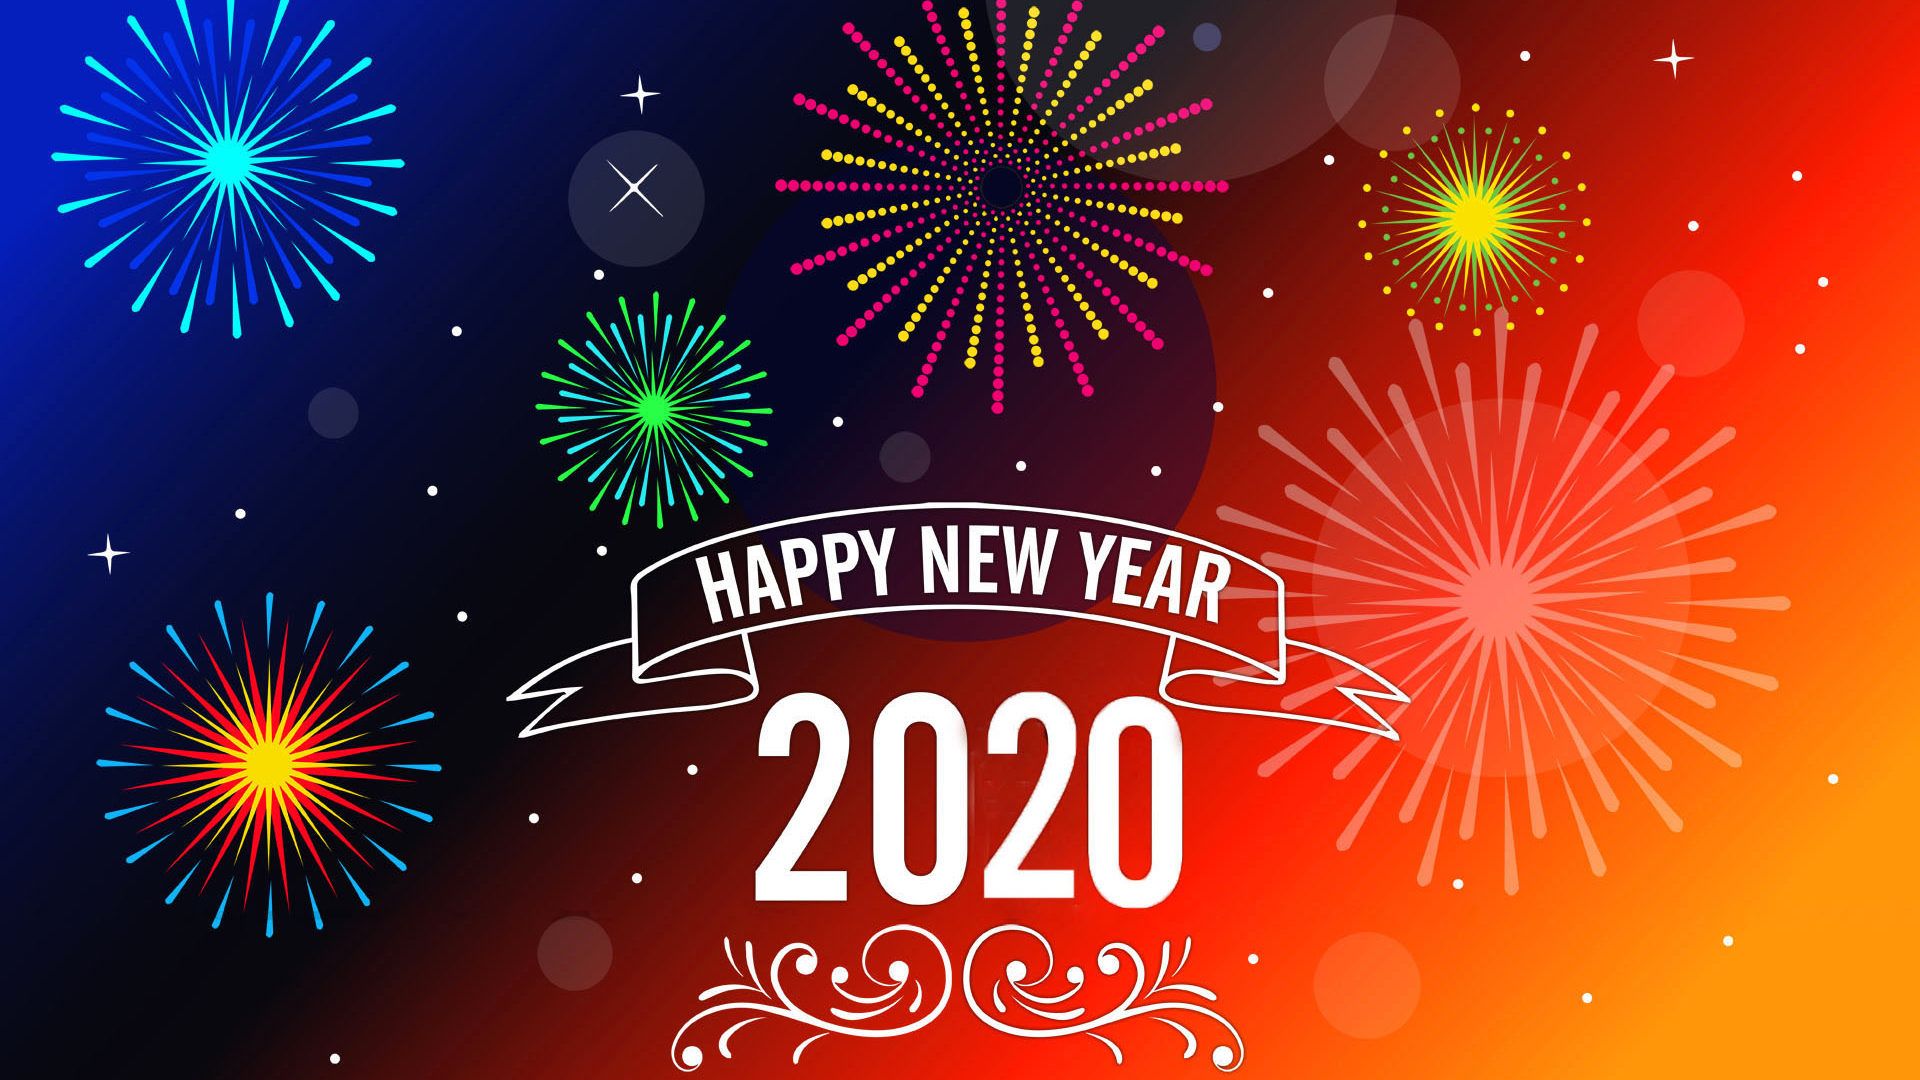 Happy New Year 2020 Wallpapers 30 images   WallpaperBoat 1920x1080